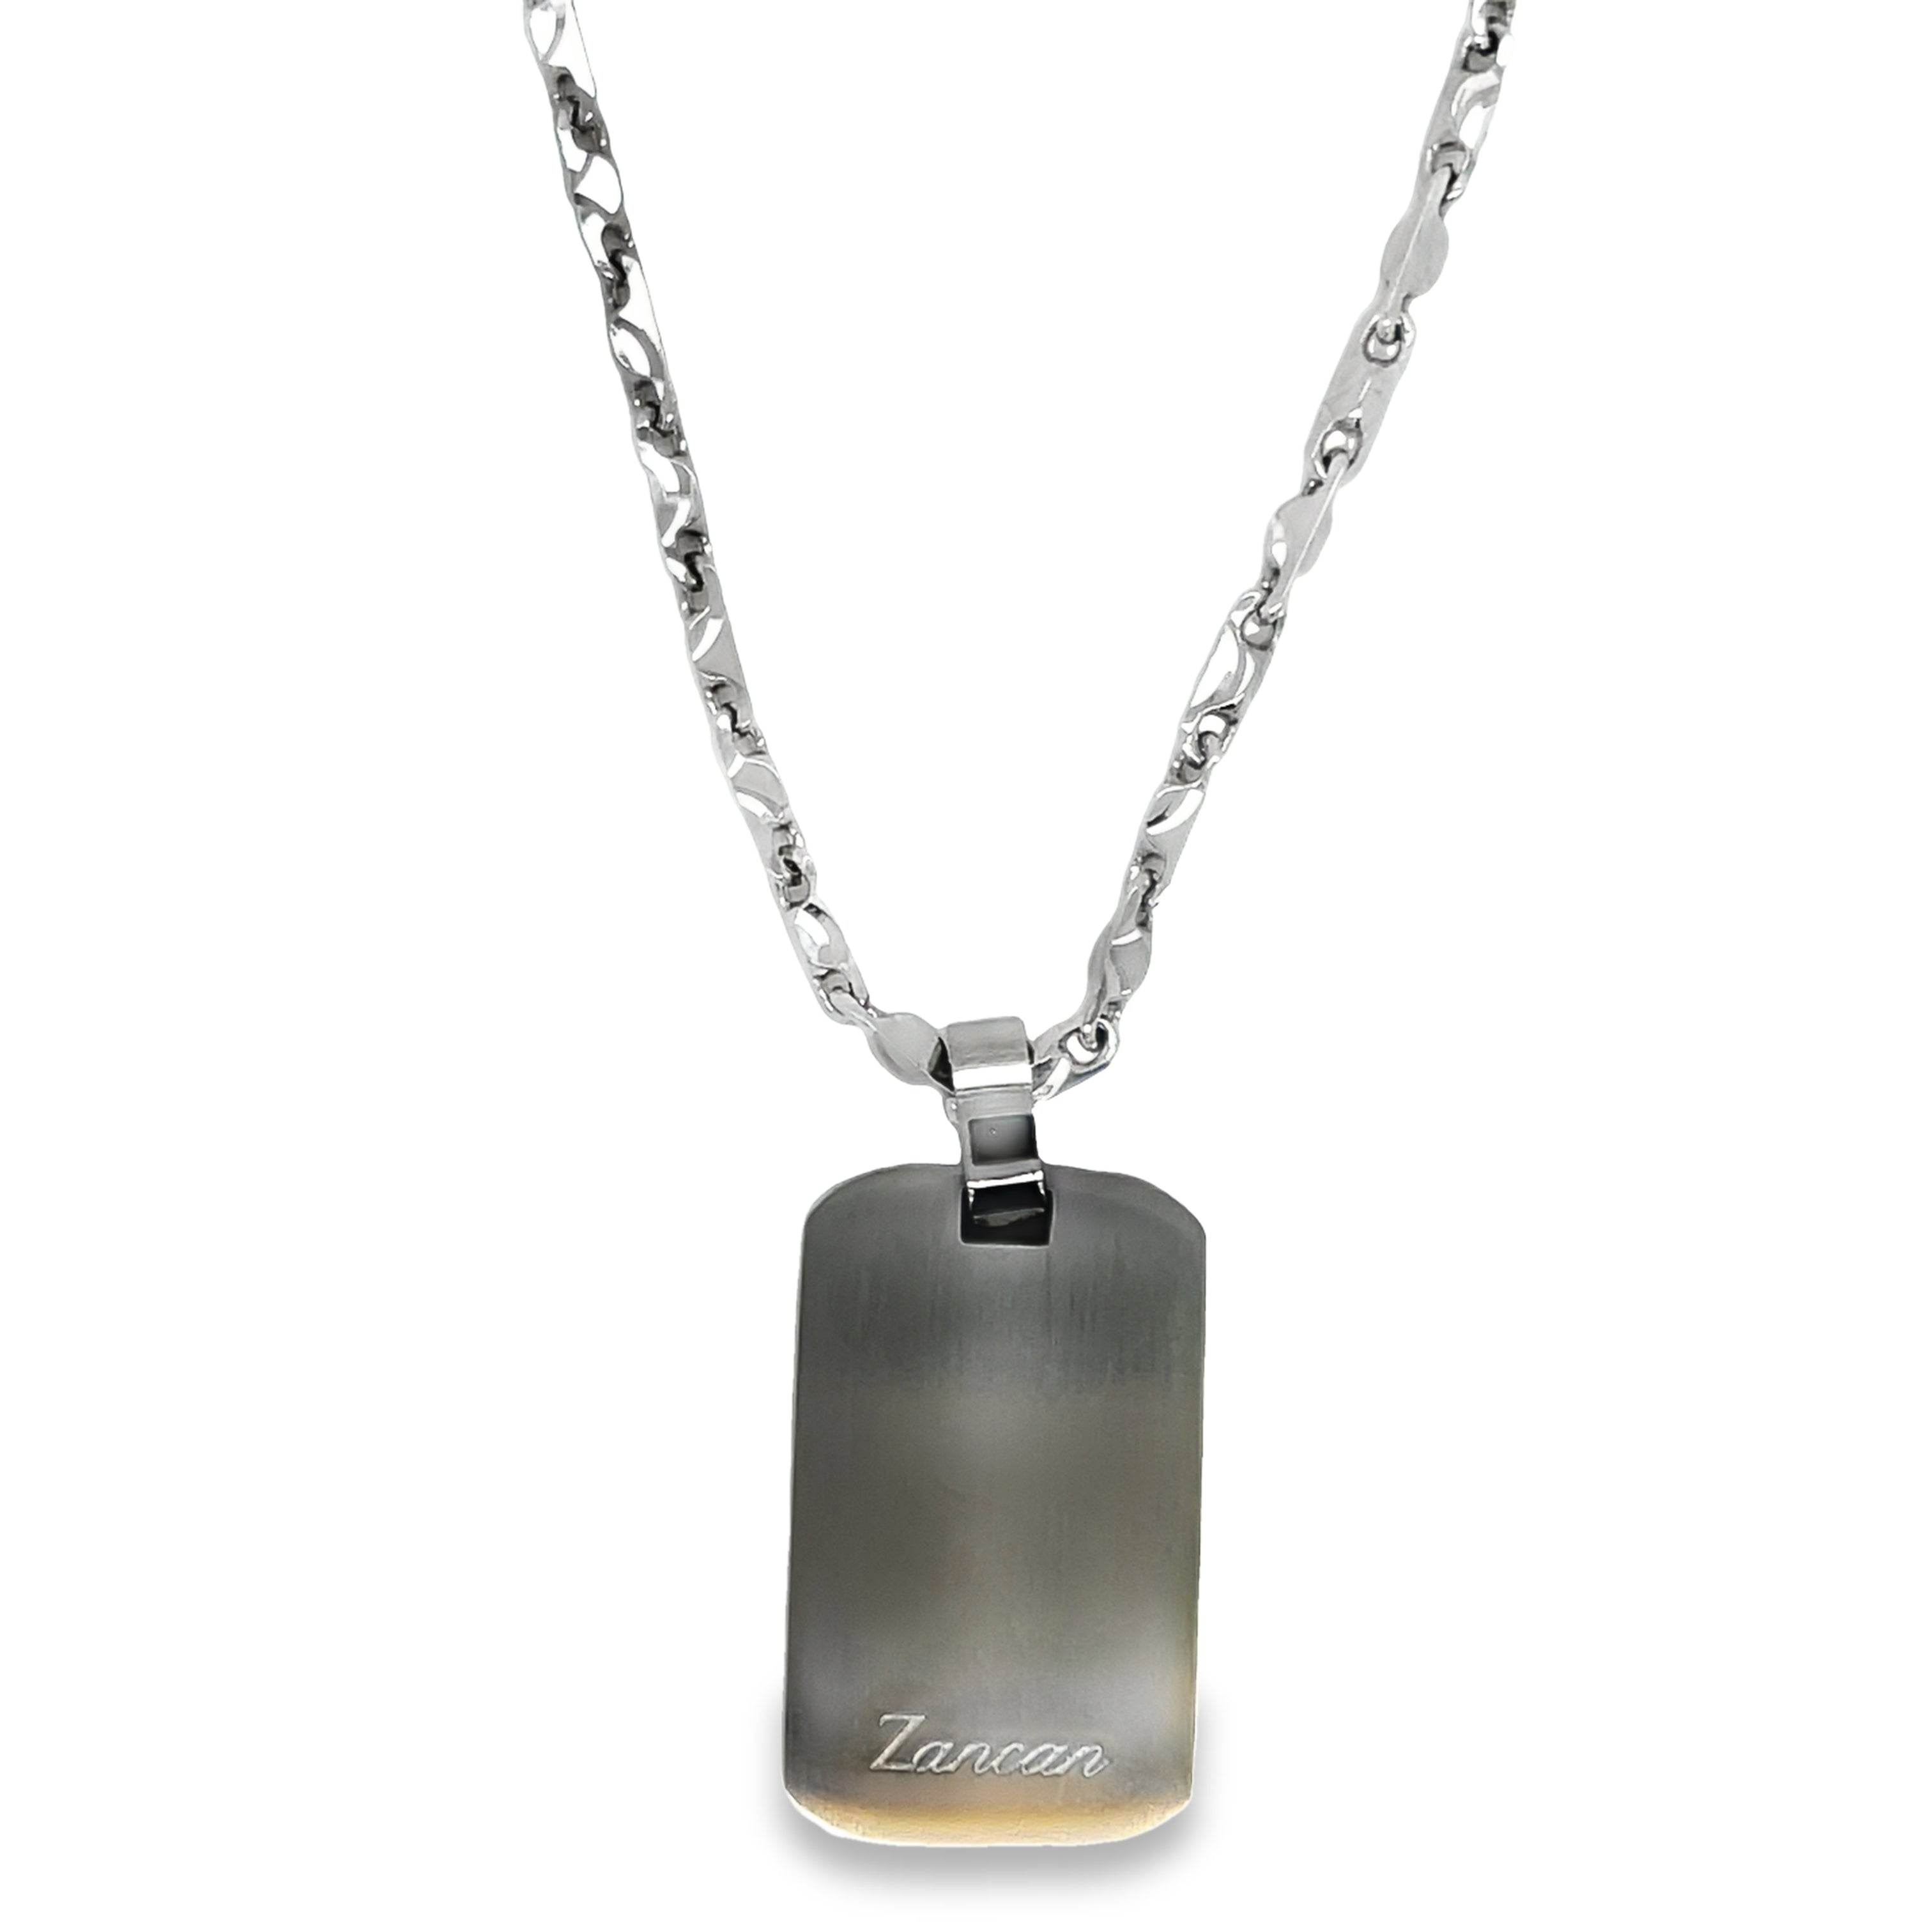 Expertly crafted in Italy, the Zancan Dog Tag is a stylish 30.00 mm pendant featuring a sleek black ceramic compass rose. Its rhodium coating adds a touch of sophistication and durability. Perfect for any dog lover or fashion-forward individual.